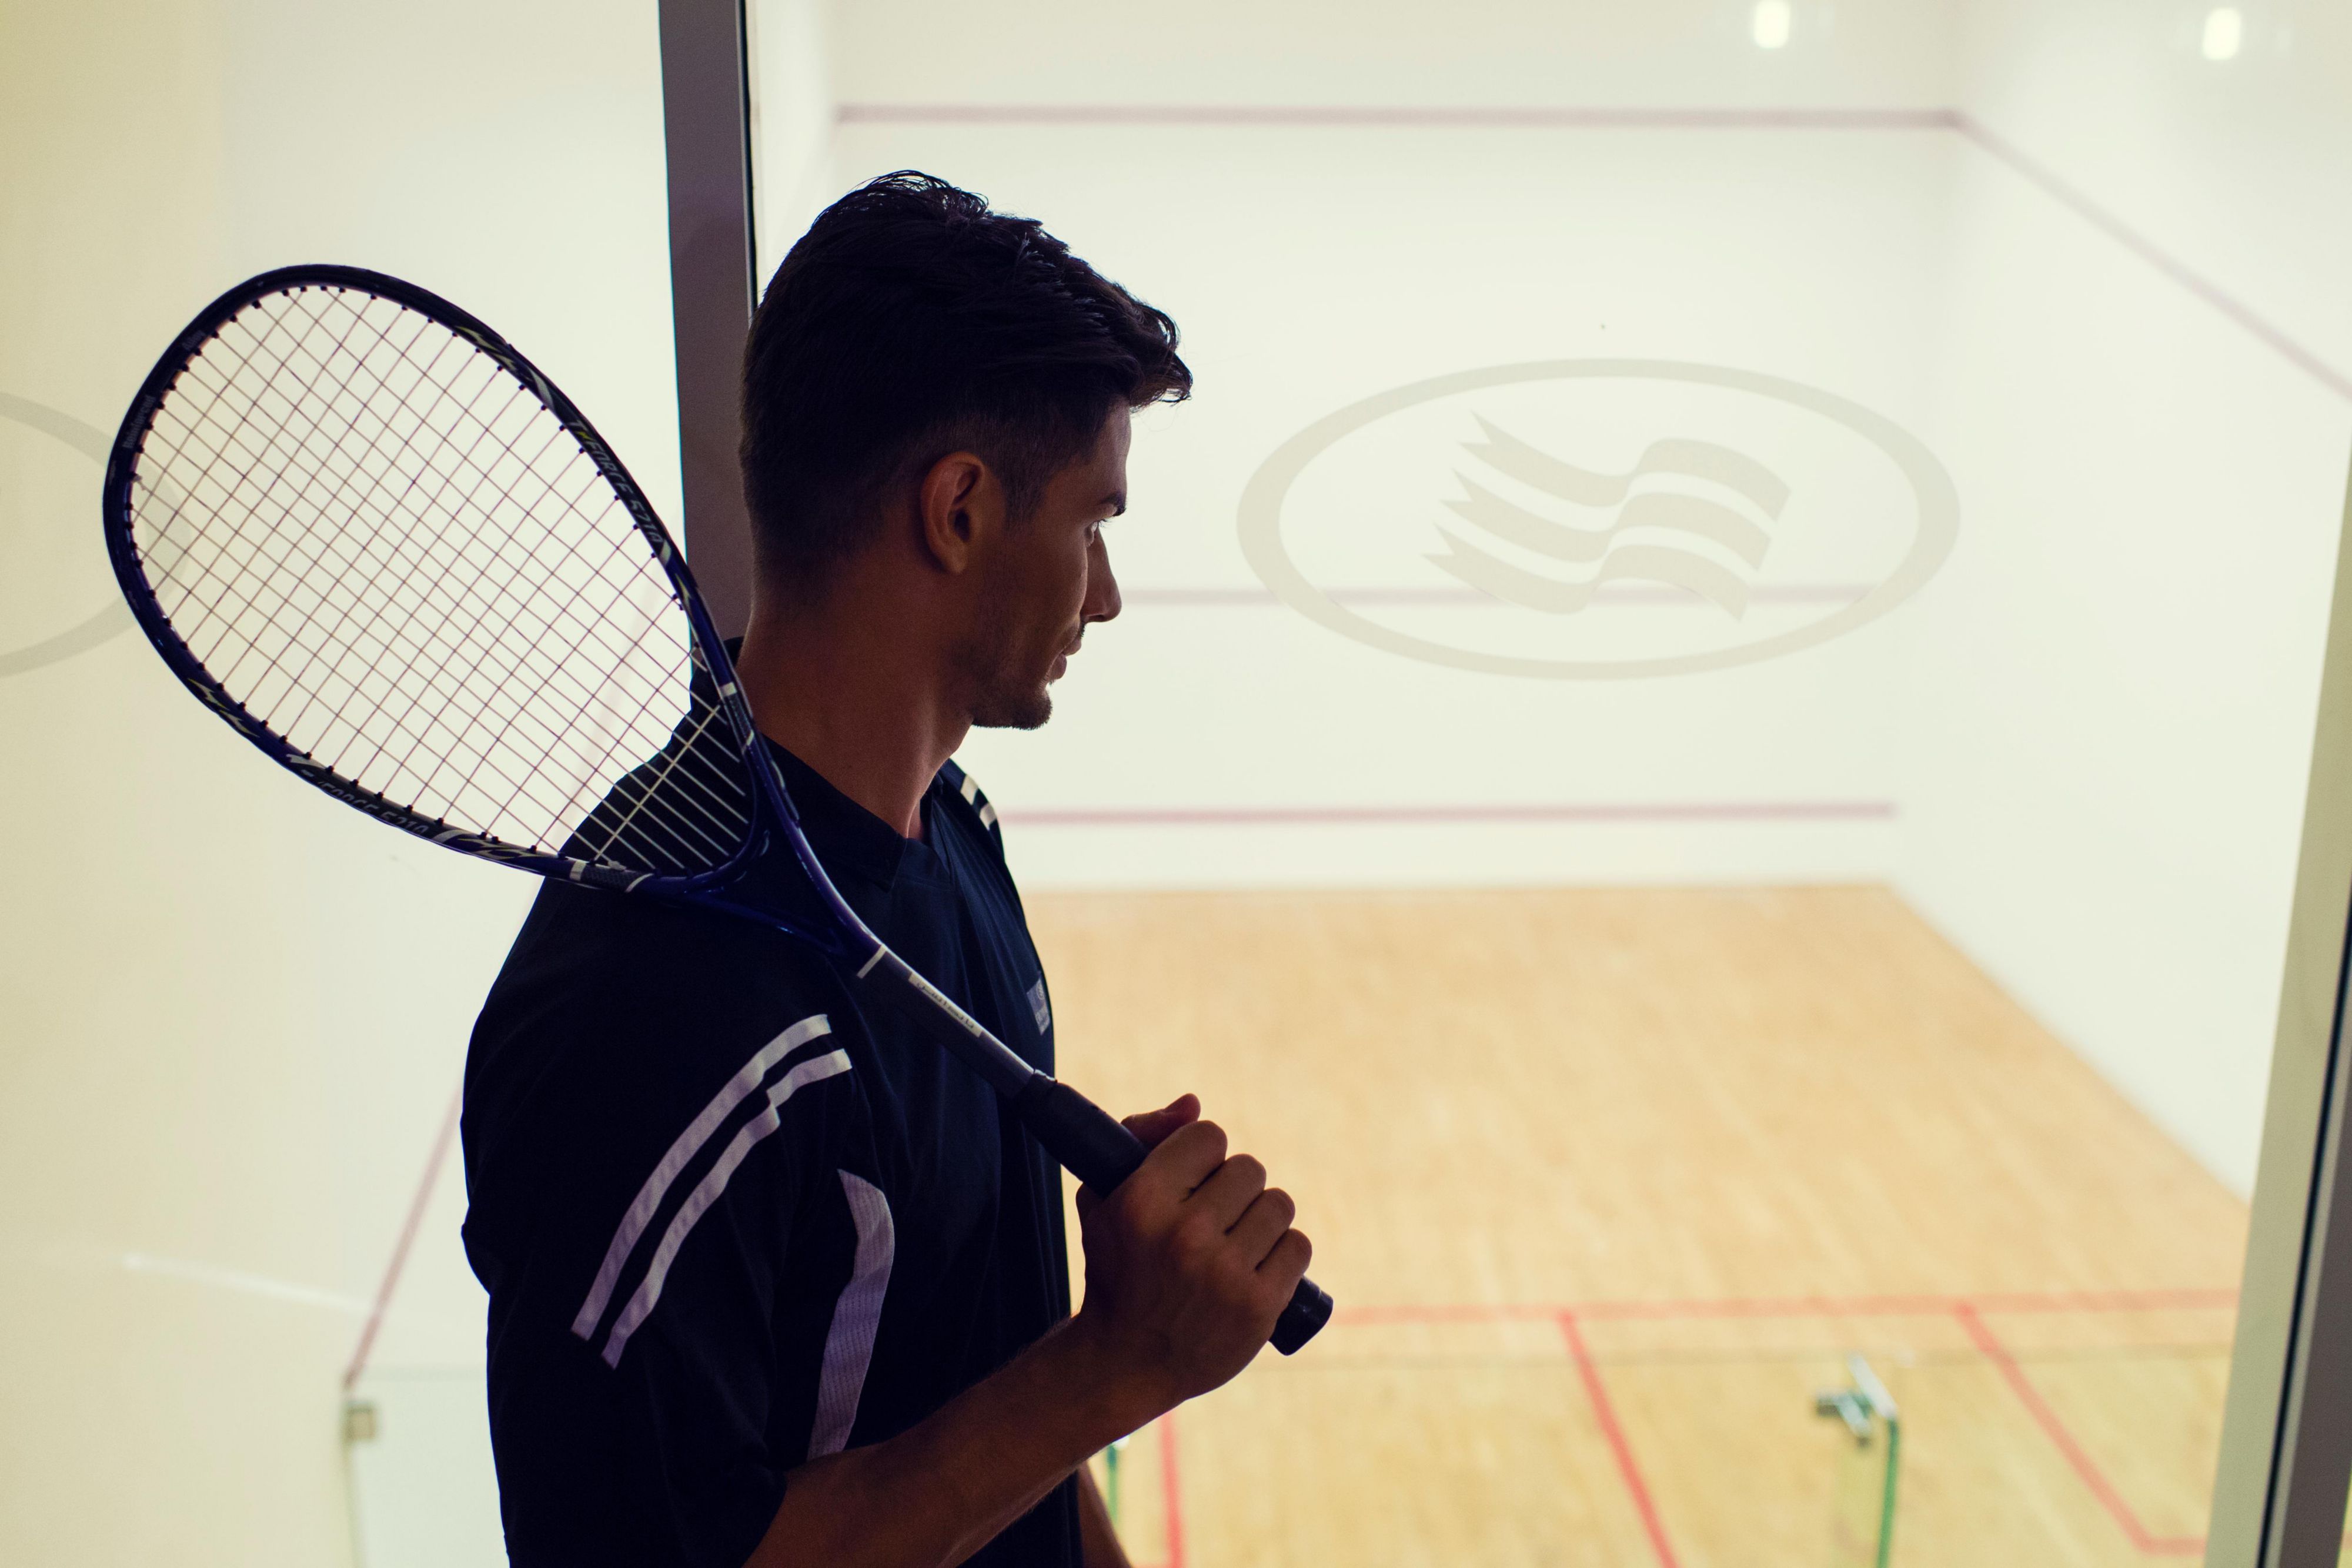 How about a competitive game of squash?